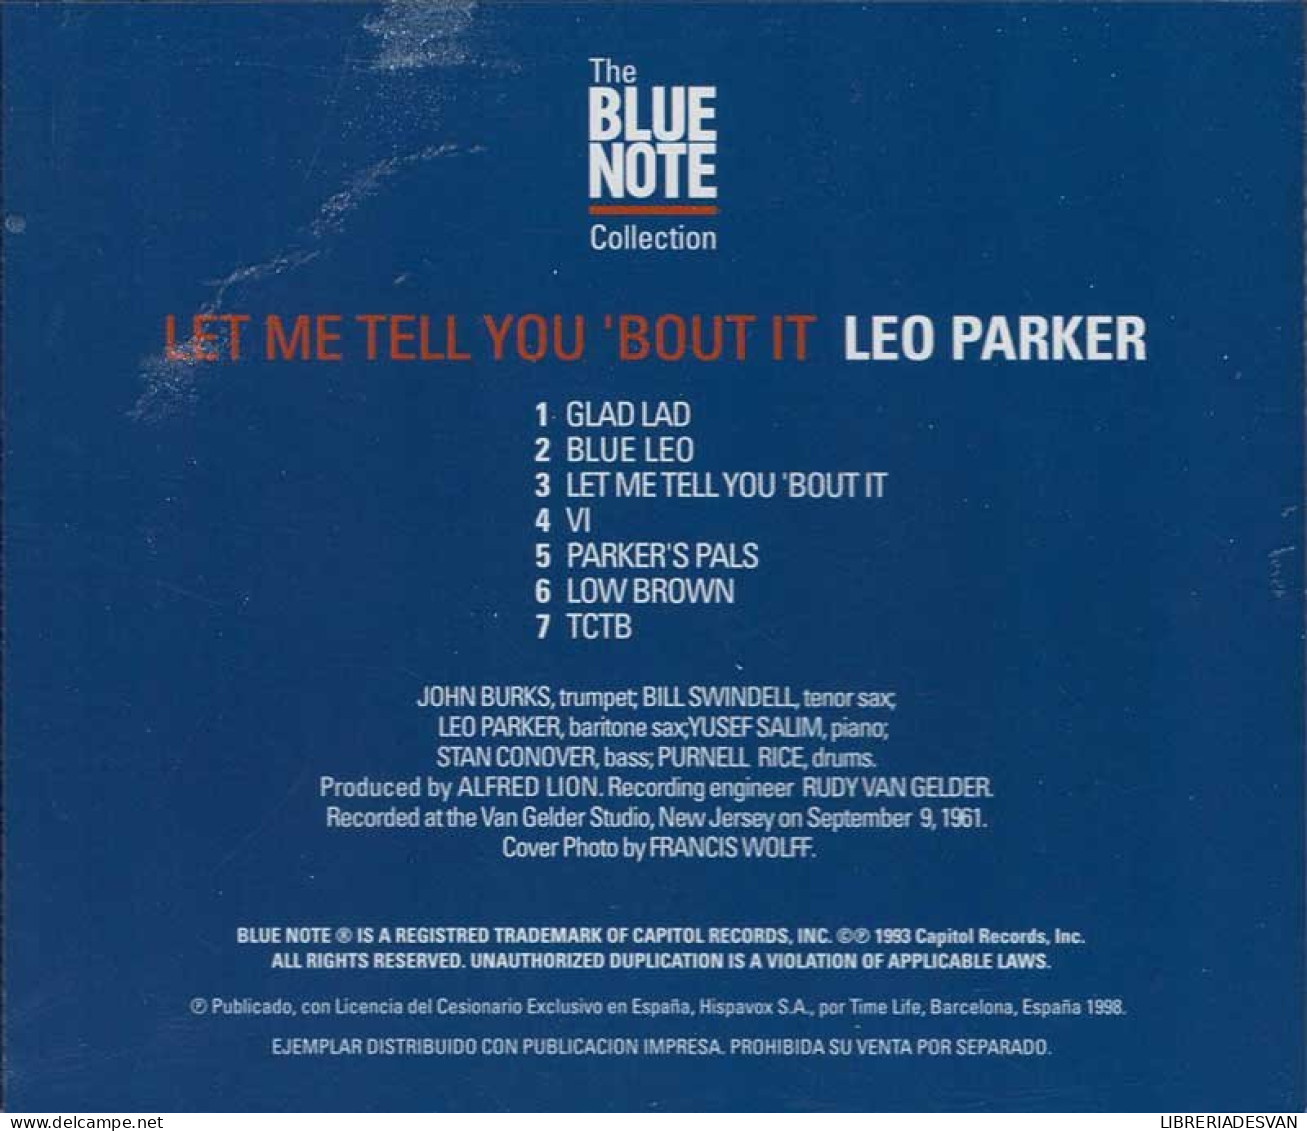 Leo Parker - Let Me Tell You 'Bout It. CD - Jazz